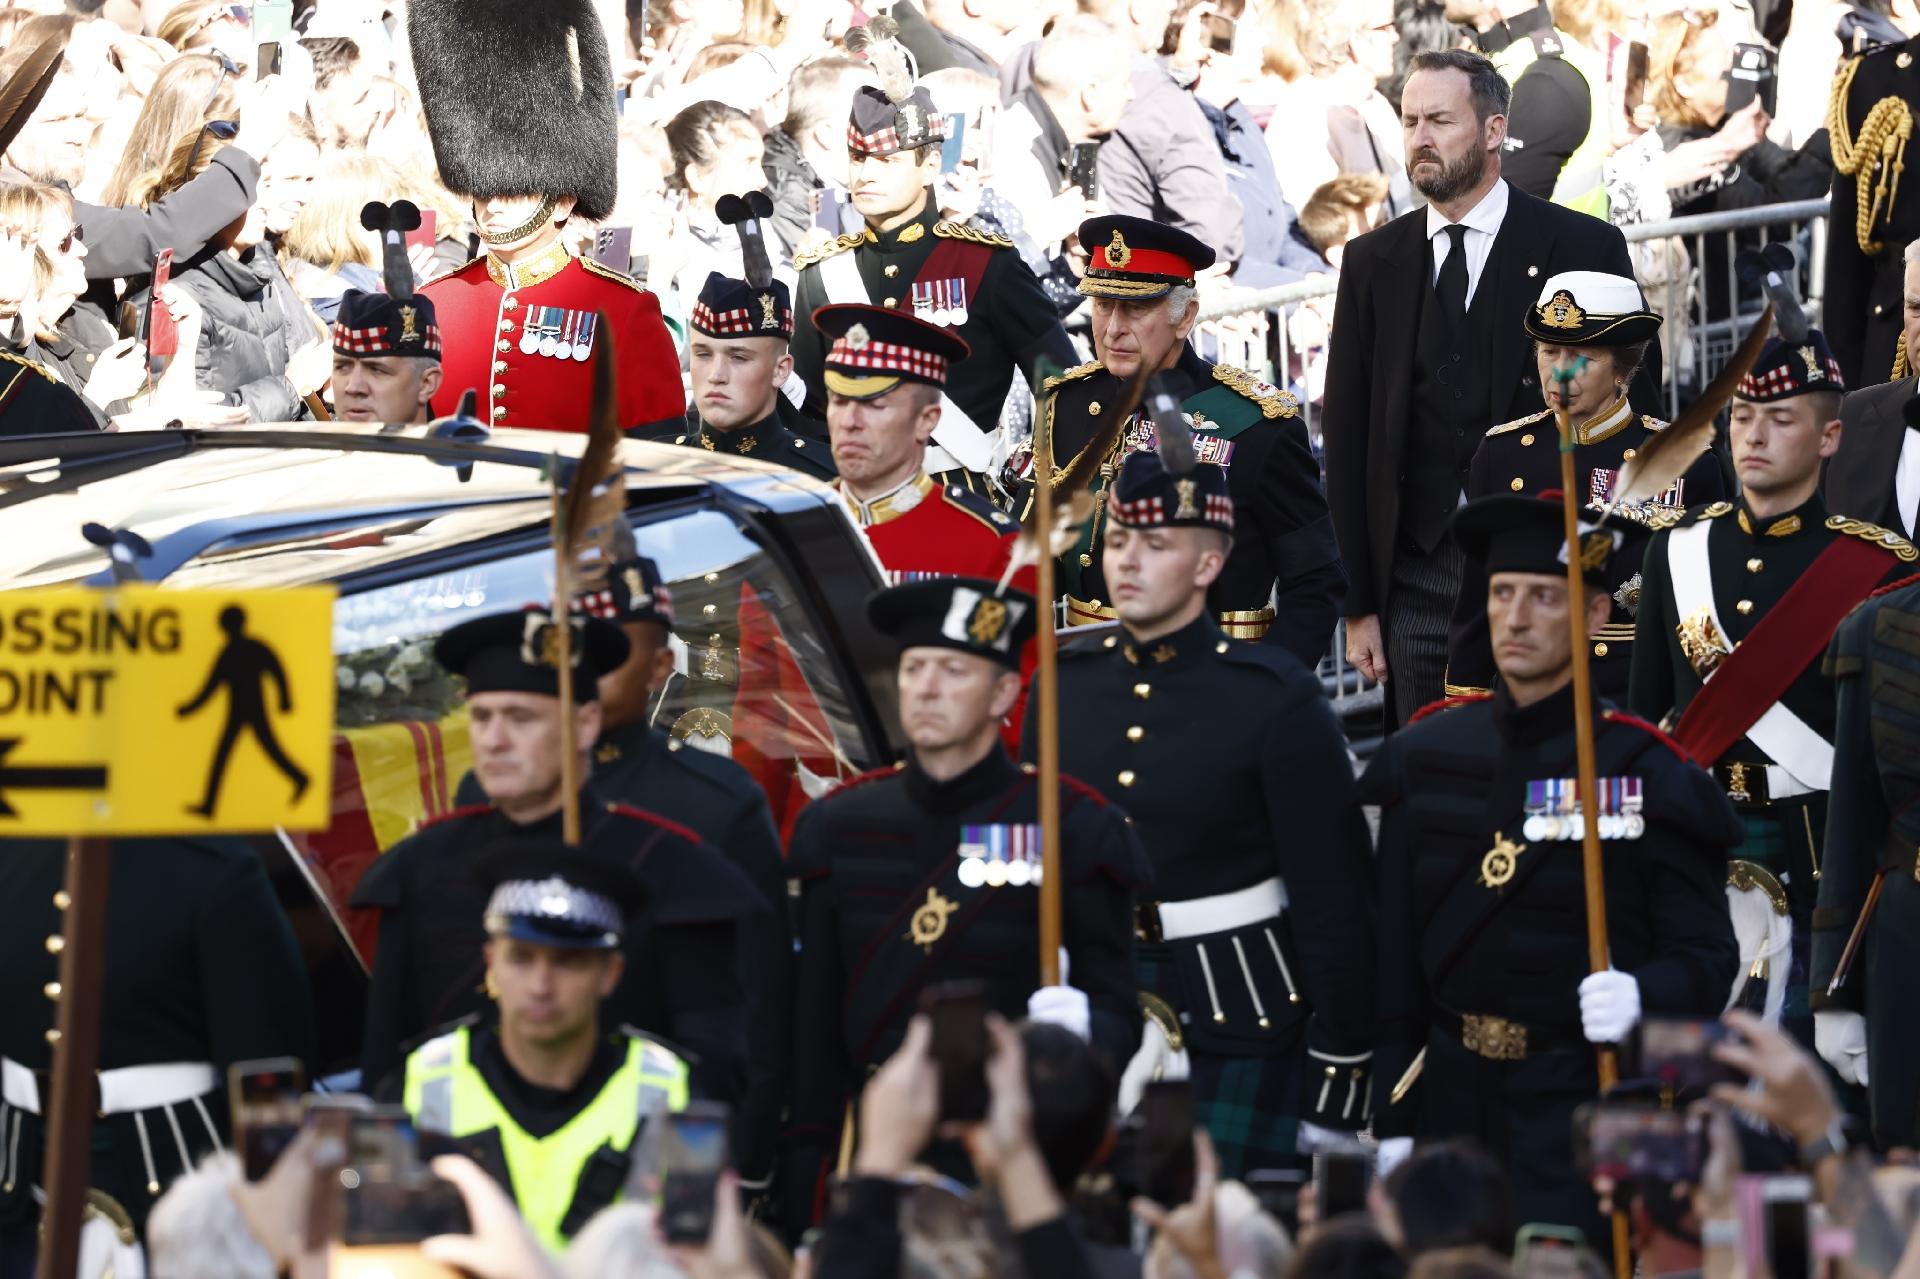     Queen Elizabeth: King's corpse departs in procession - Jeff J. Mitchell / Getty Images